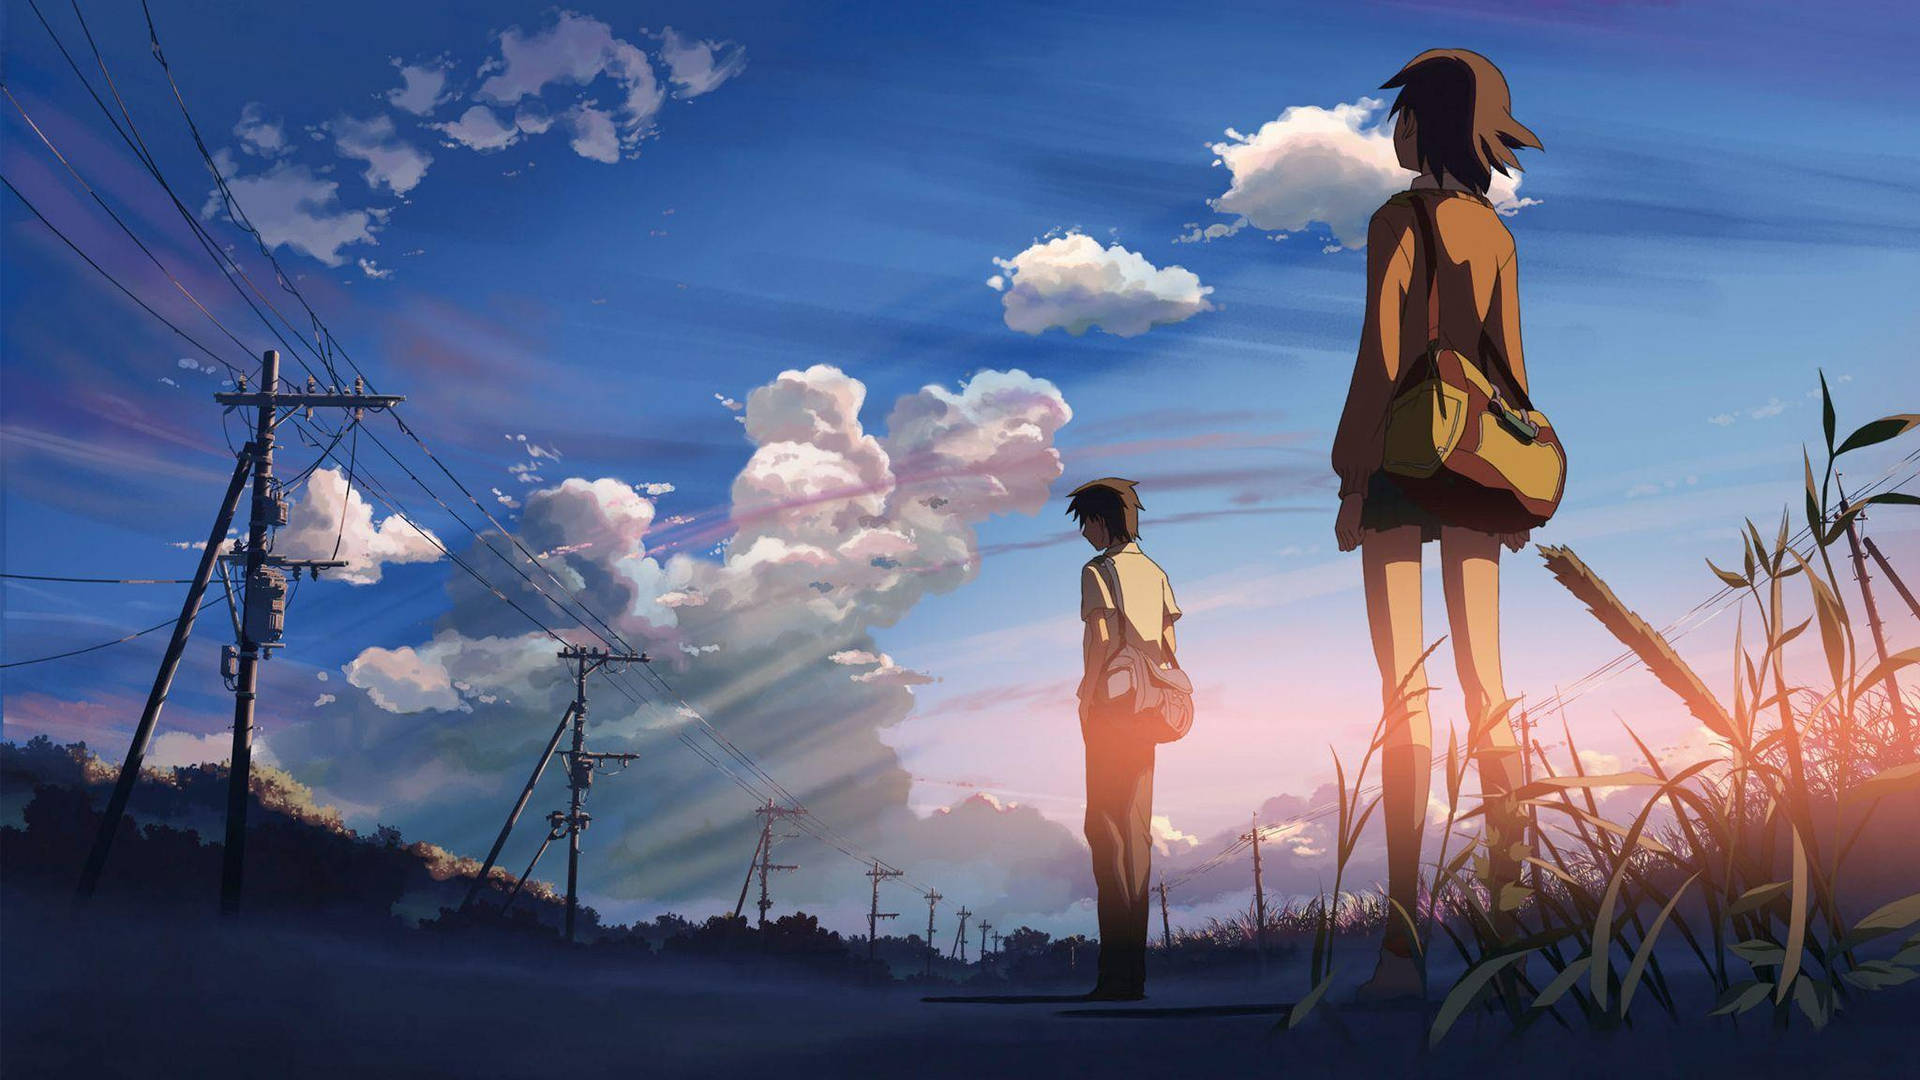 4k Aesthetic Anime Five Centimeters Per Second Background